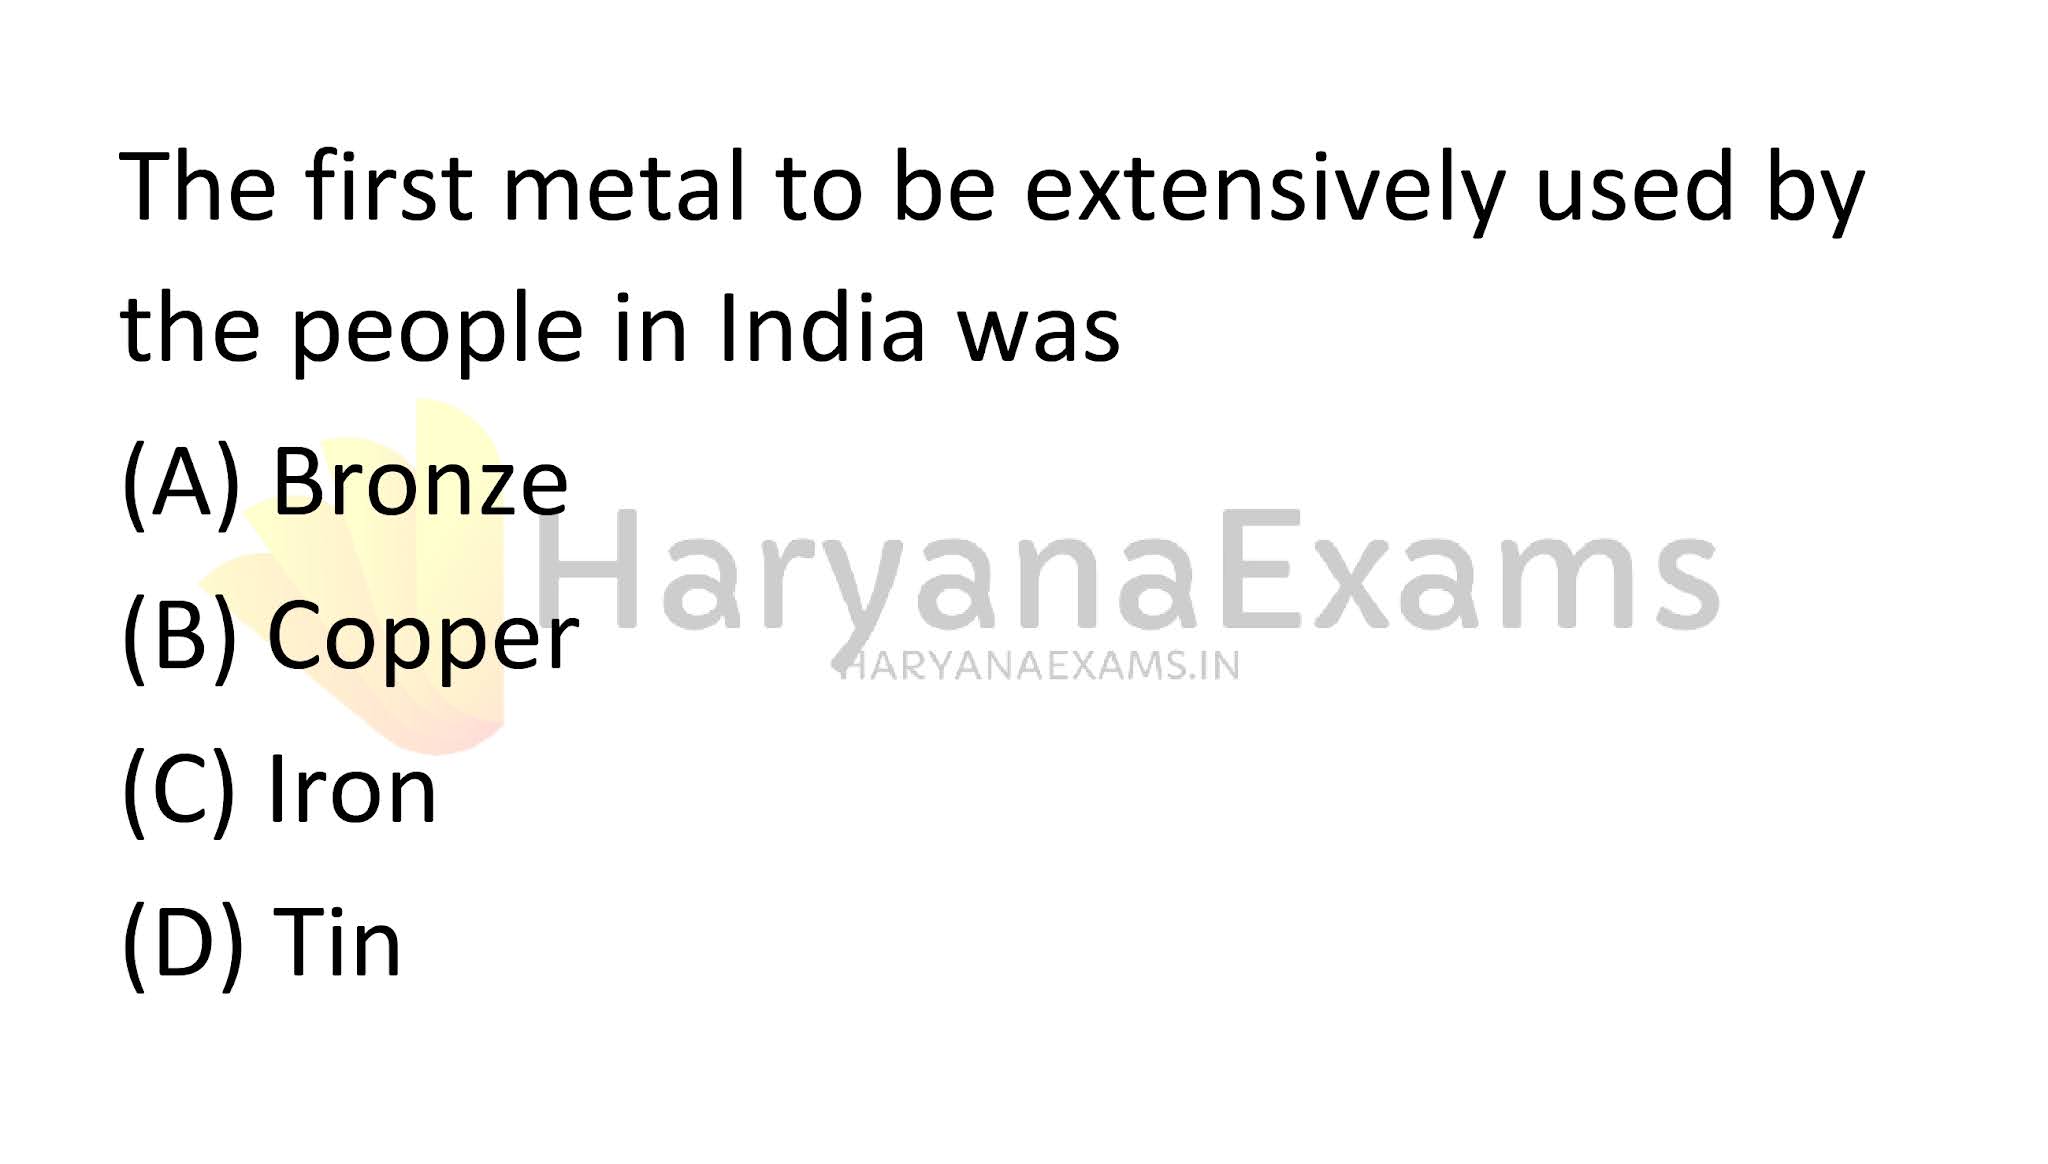 The first metal to be extensively used by the people in India was